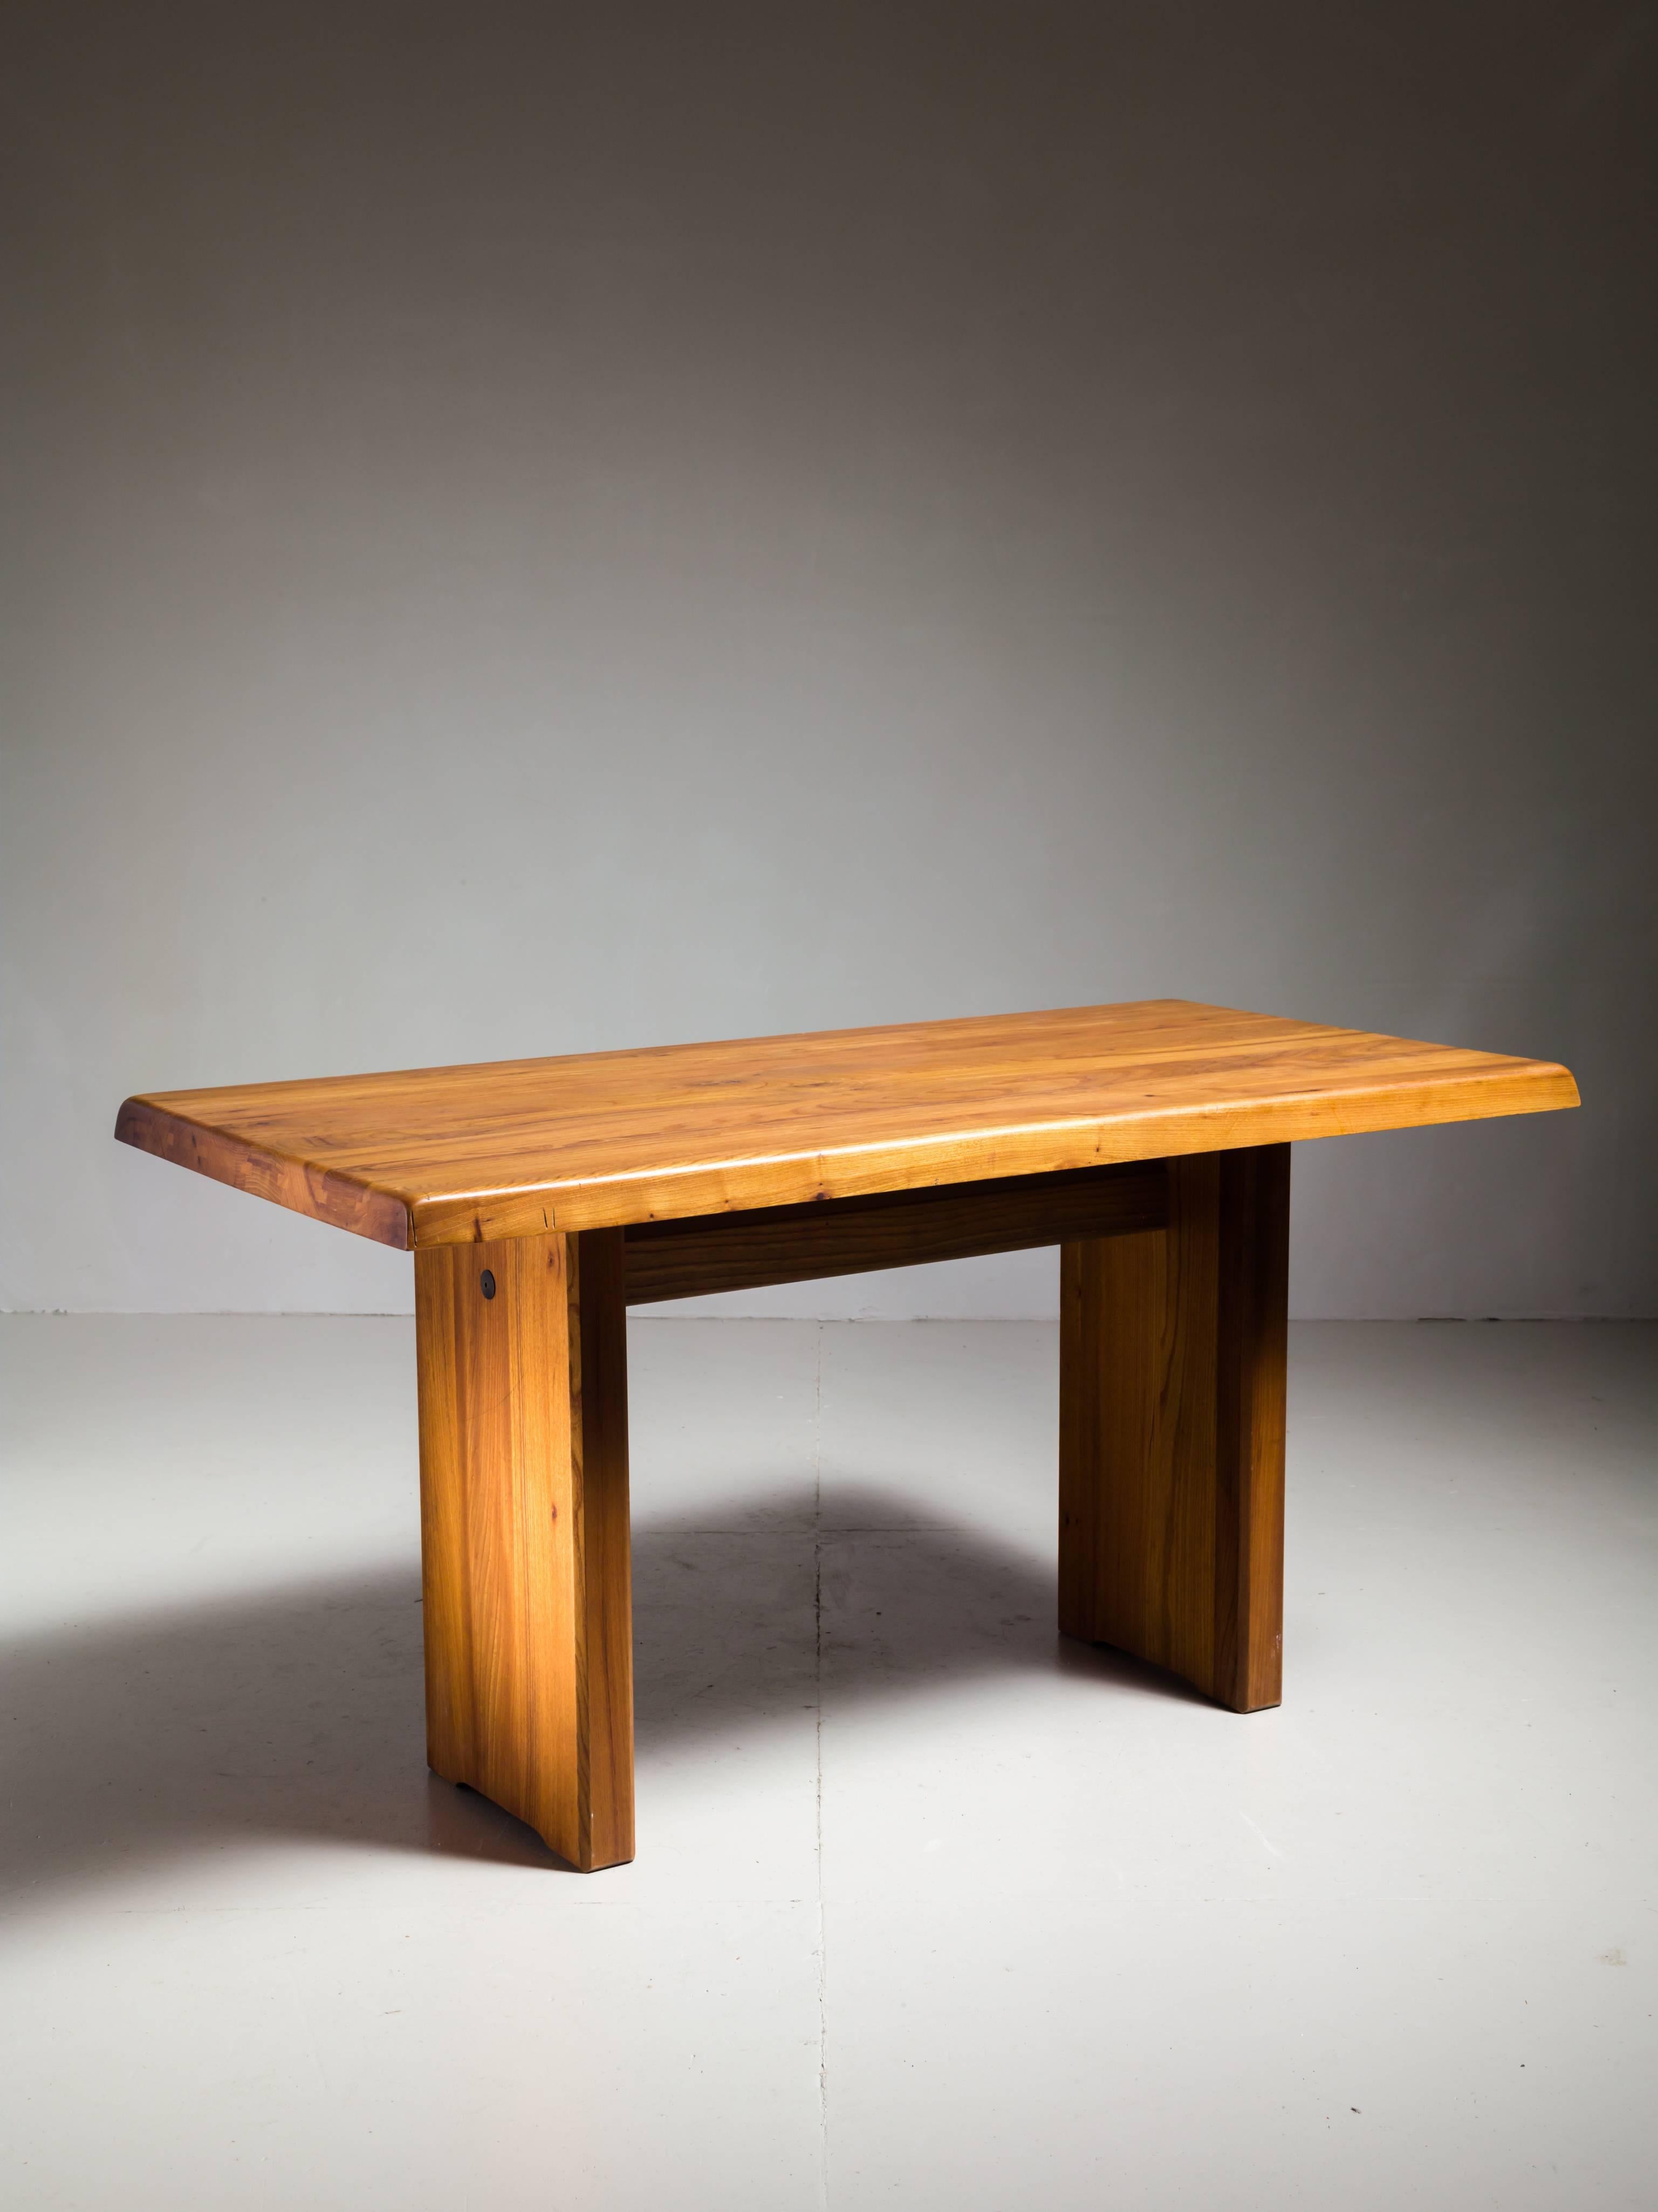 A model T14A dining table in the Campagne style, by French designer Pierre Chapo. The solid elm has a beautiful warm color and is in a great condition. The table has the wonderful connections that Chapo's works is known for.
Matching benches also